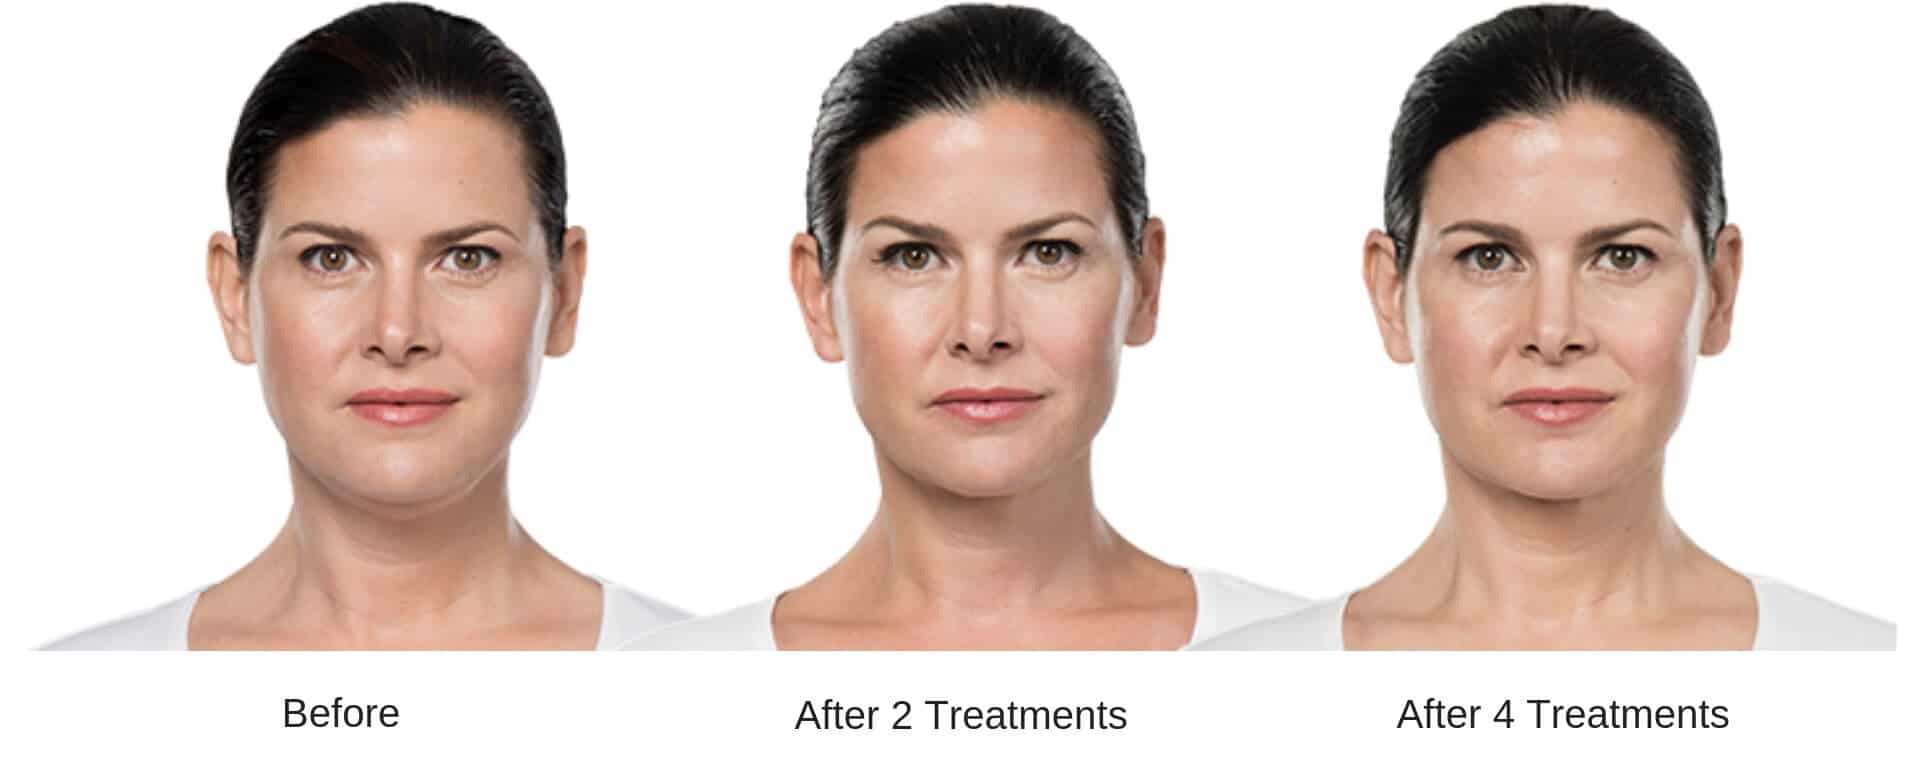 Womans before and after 6 treatment results from Kybella.